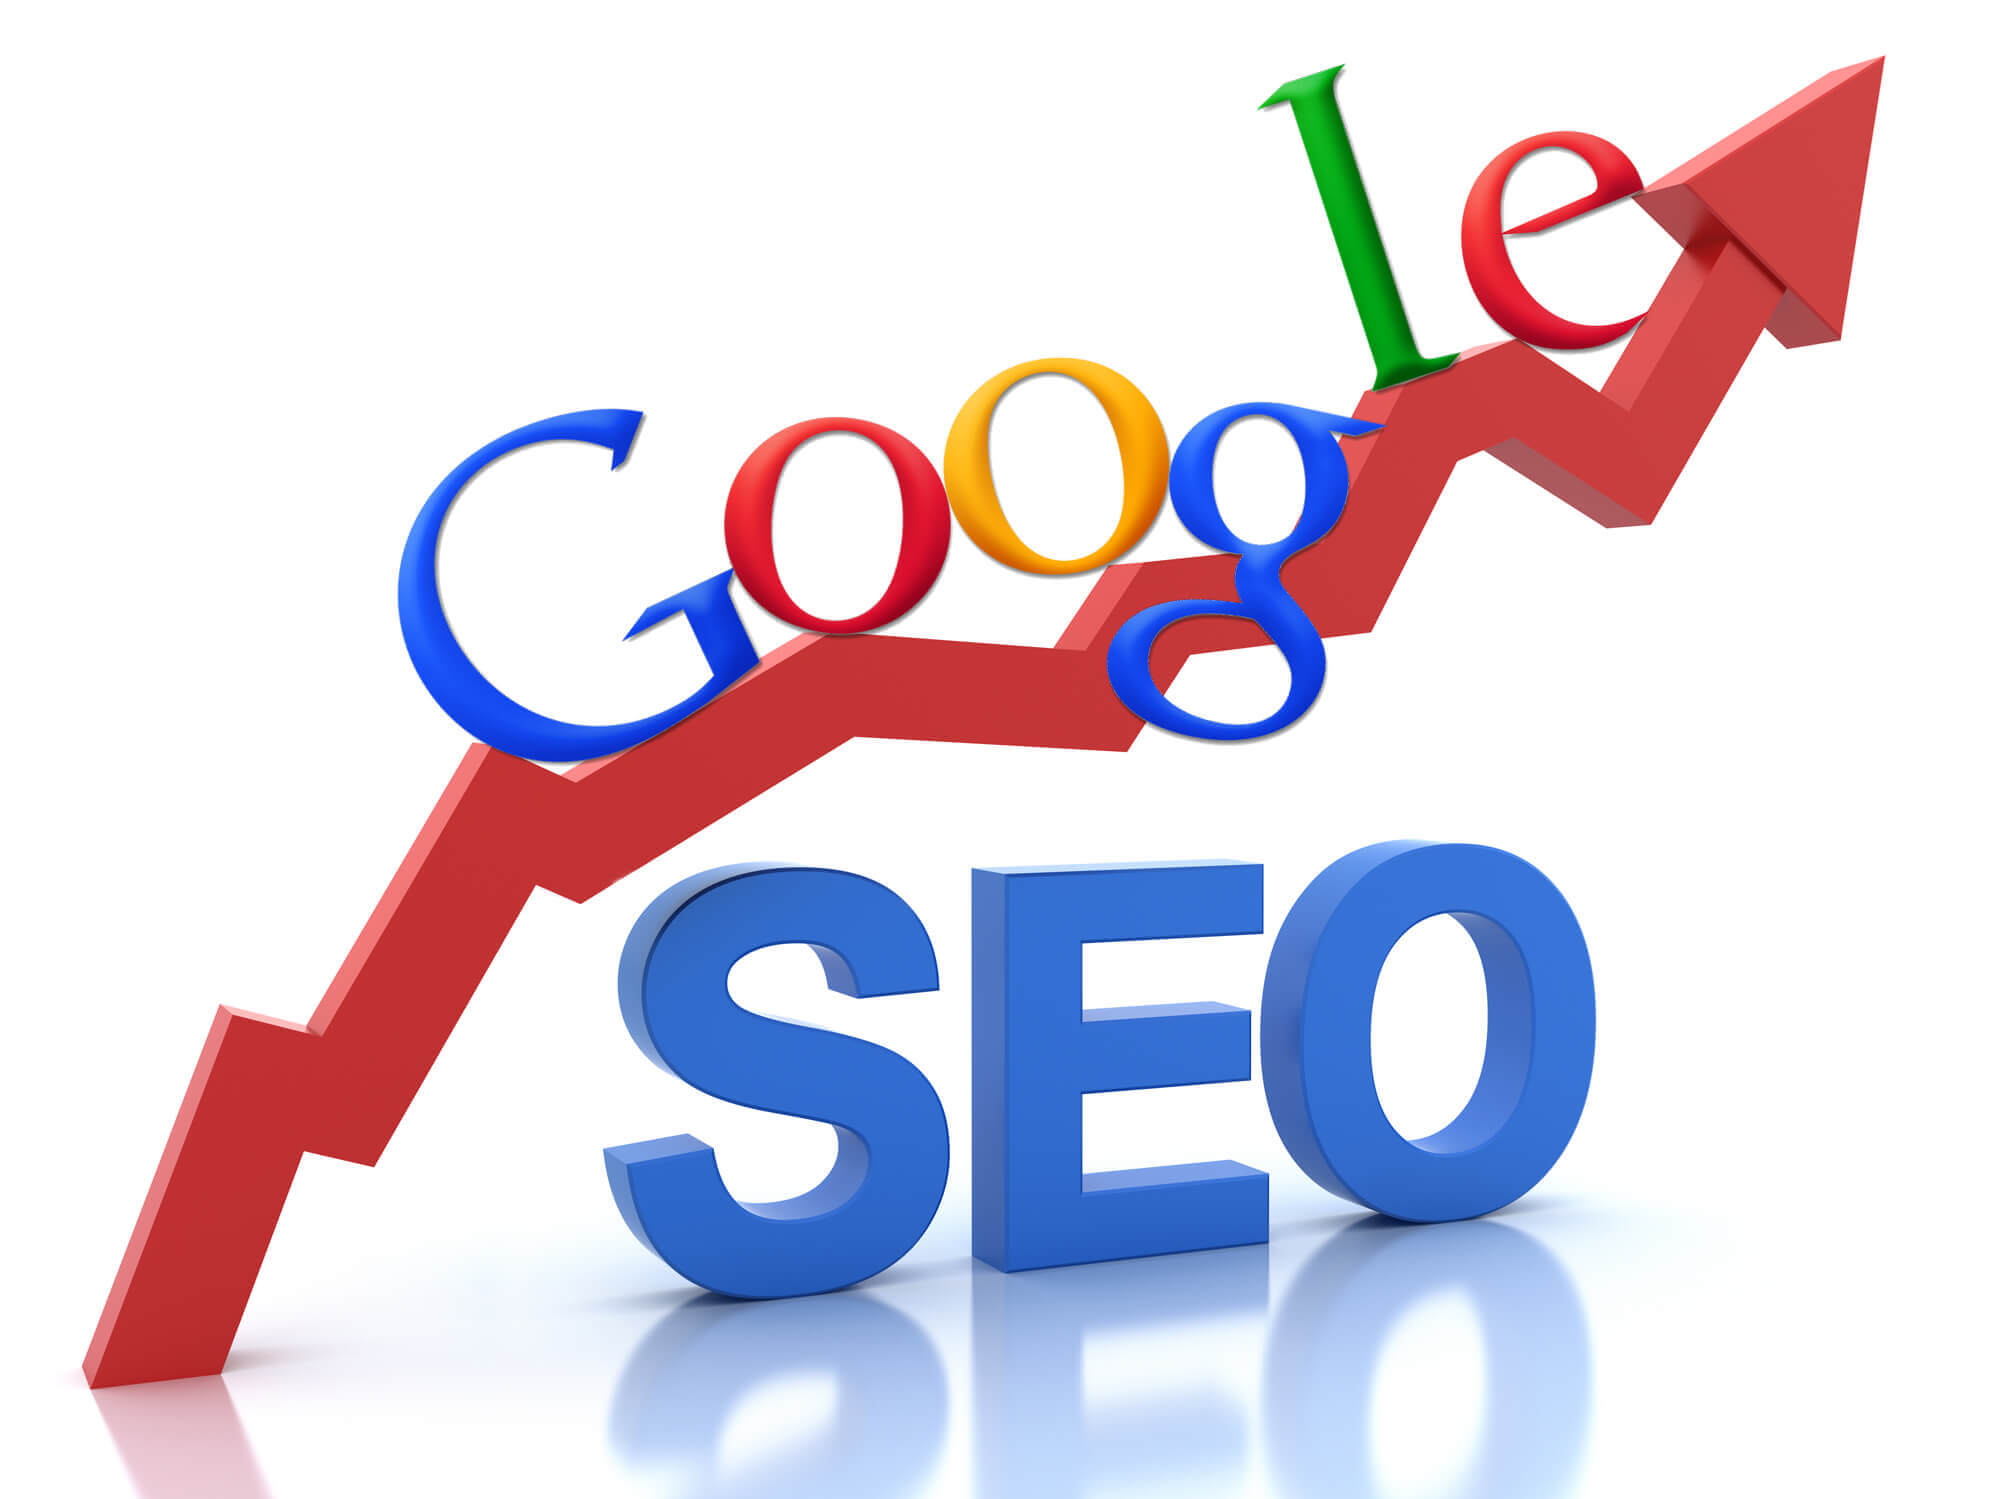 Being discoverable on search engines is one the most important aspects of having a website.